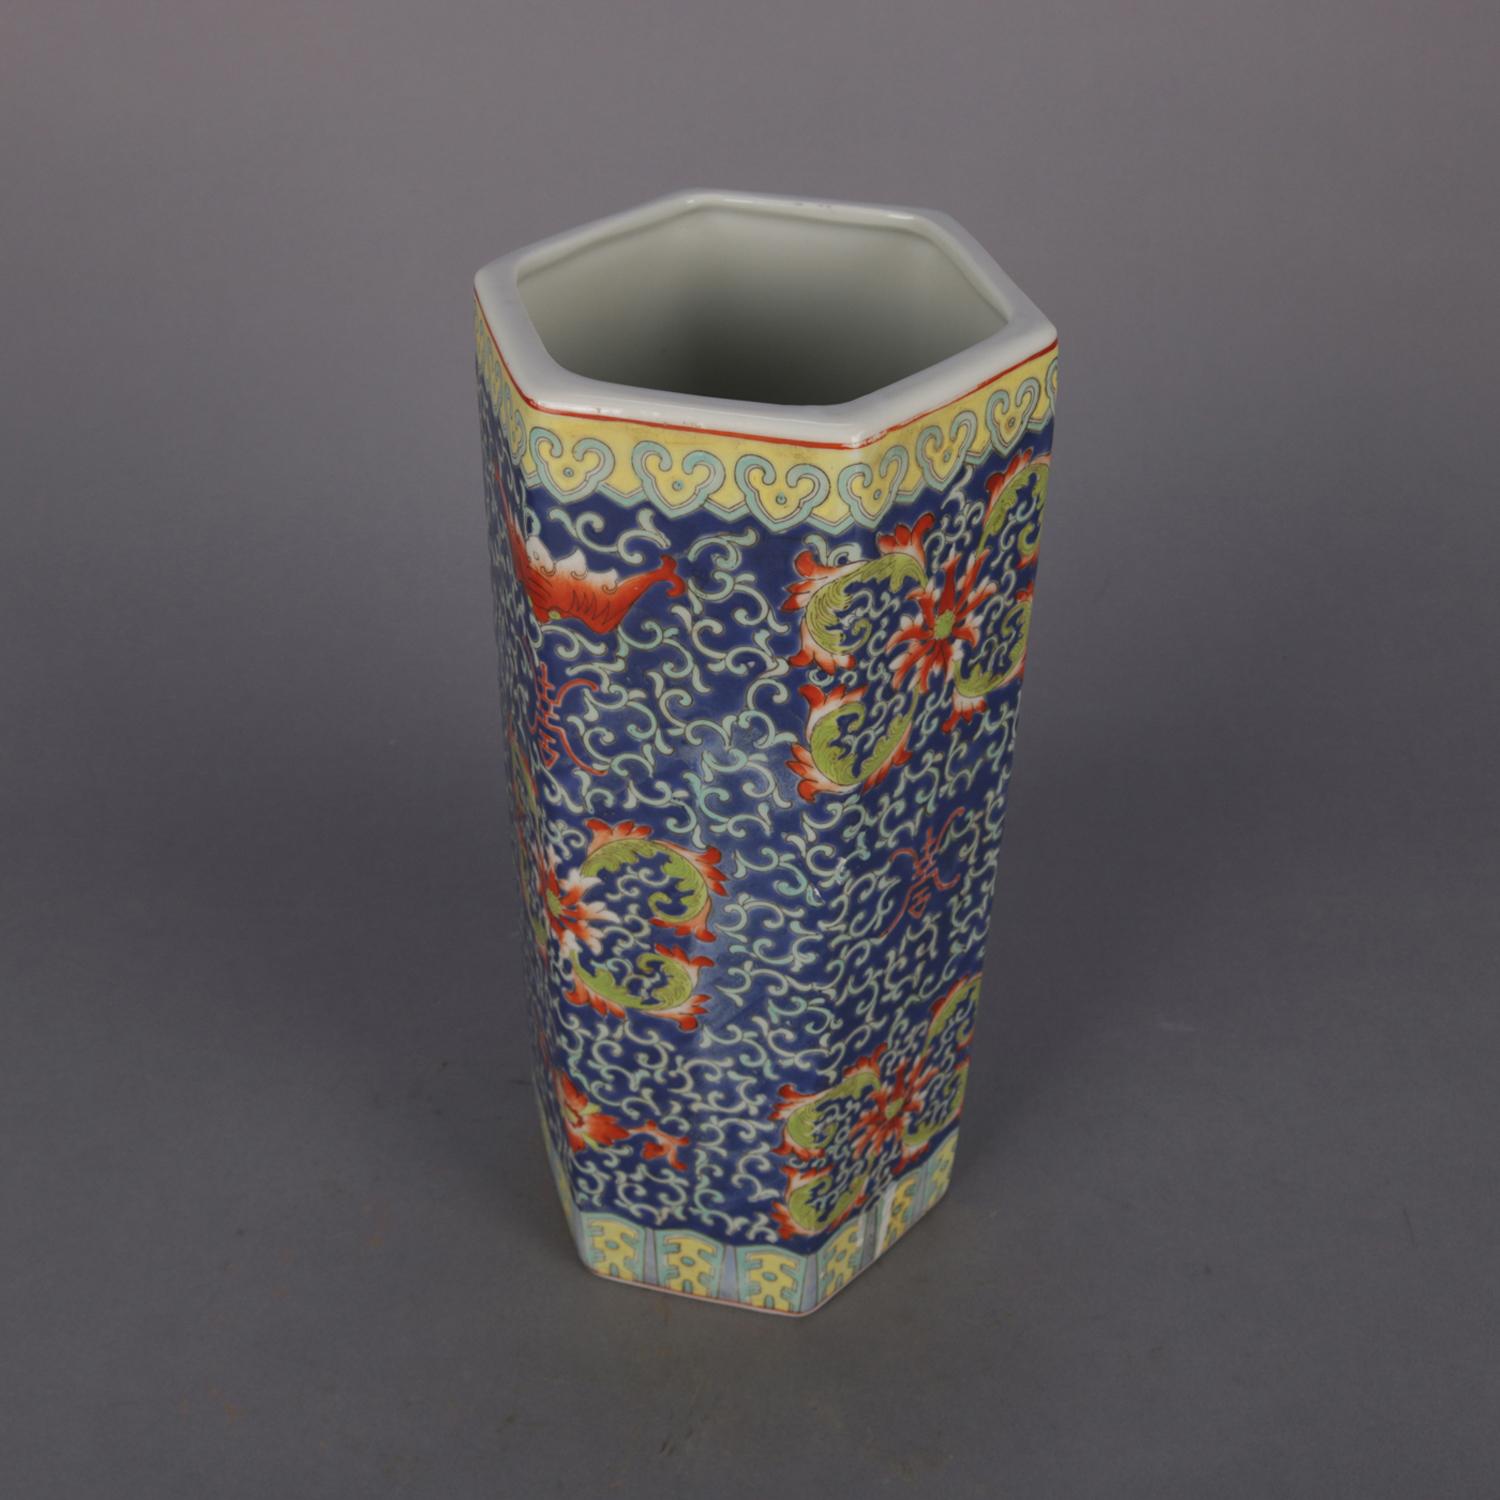 Chinese enameled vase flower vase features hexagonal tower form with scroll and foliate motif on blue ground and having paneled collar and base, en verso stamp signed, 20th century.

Measures: 12.5